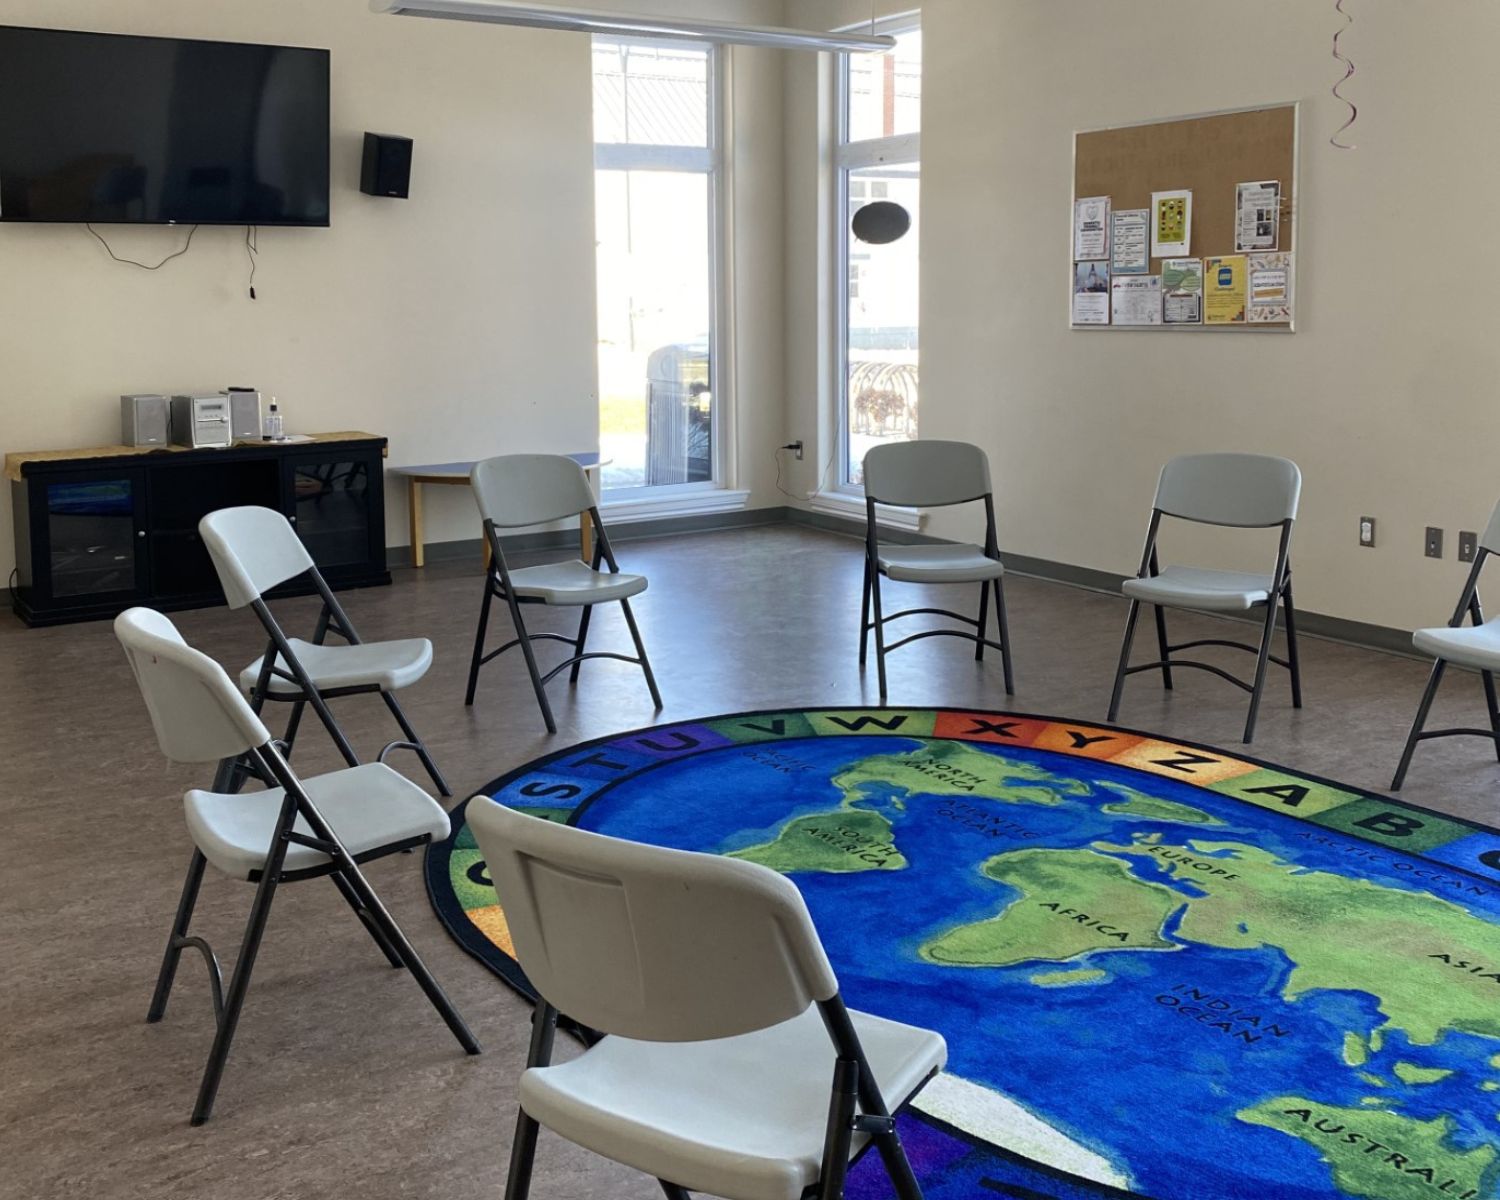 The PEPL program room set up with chairs in a circle